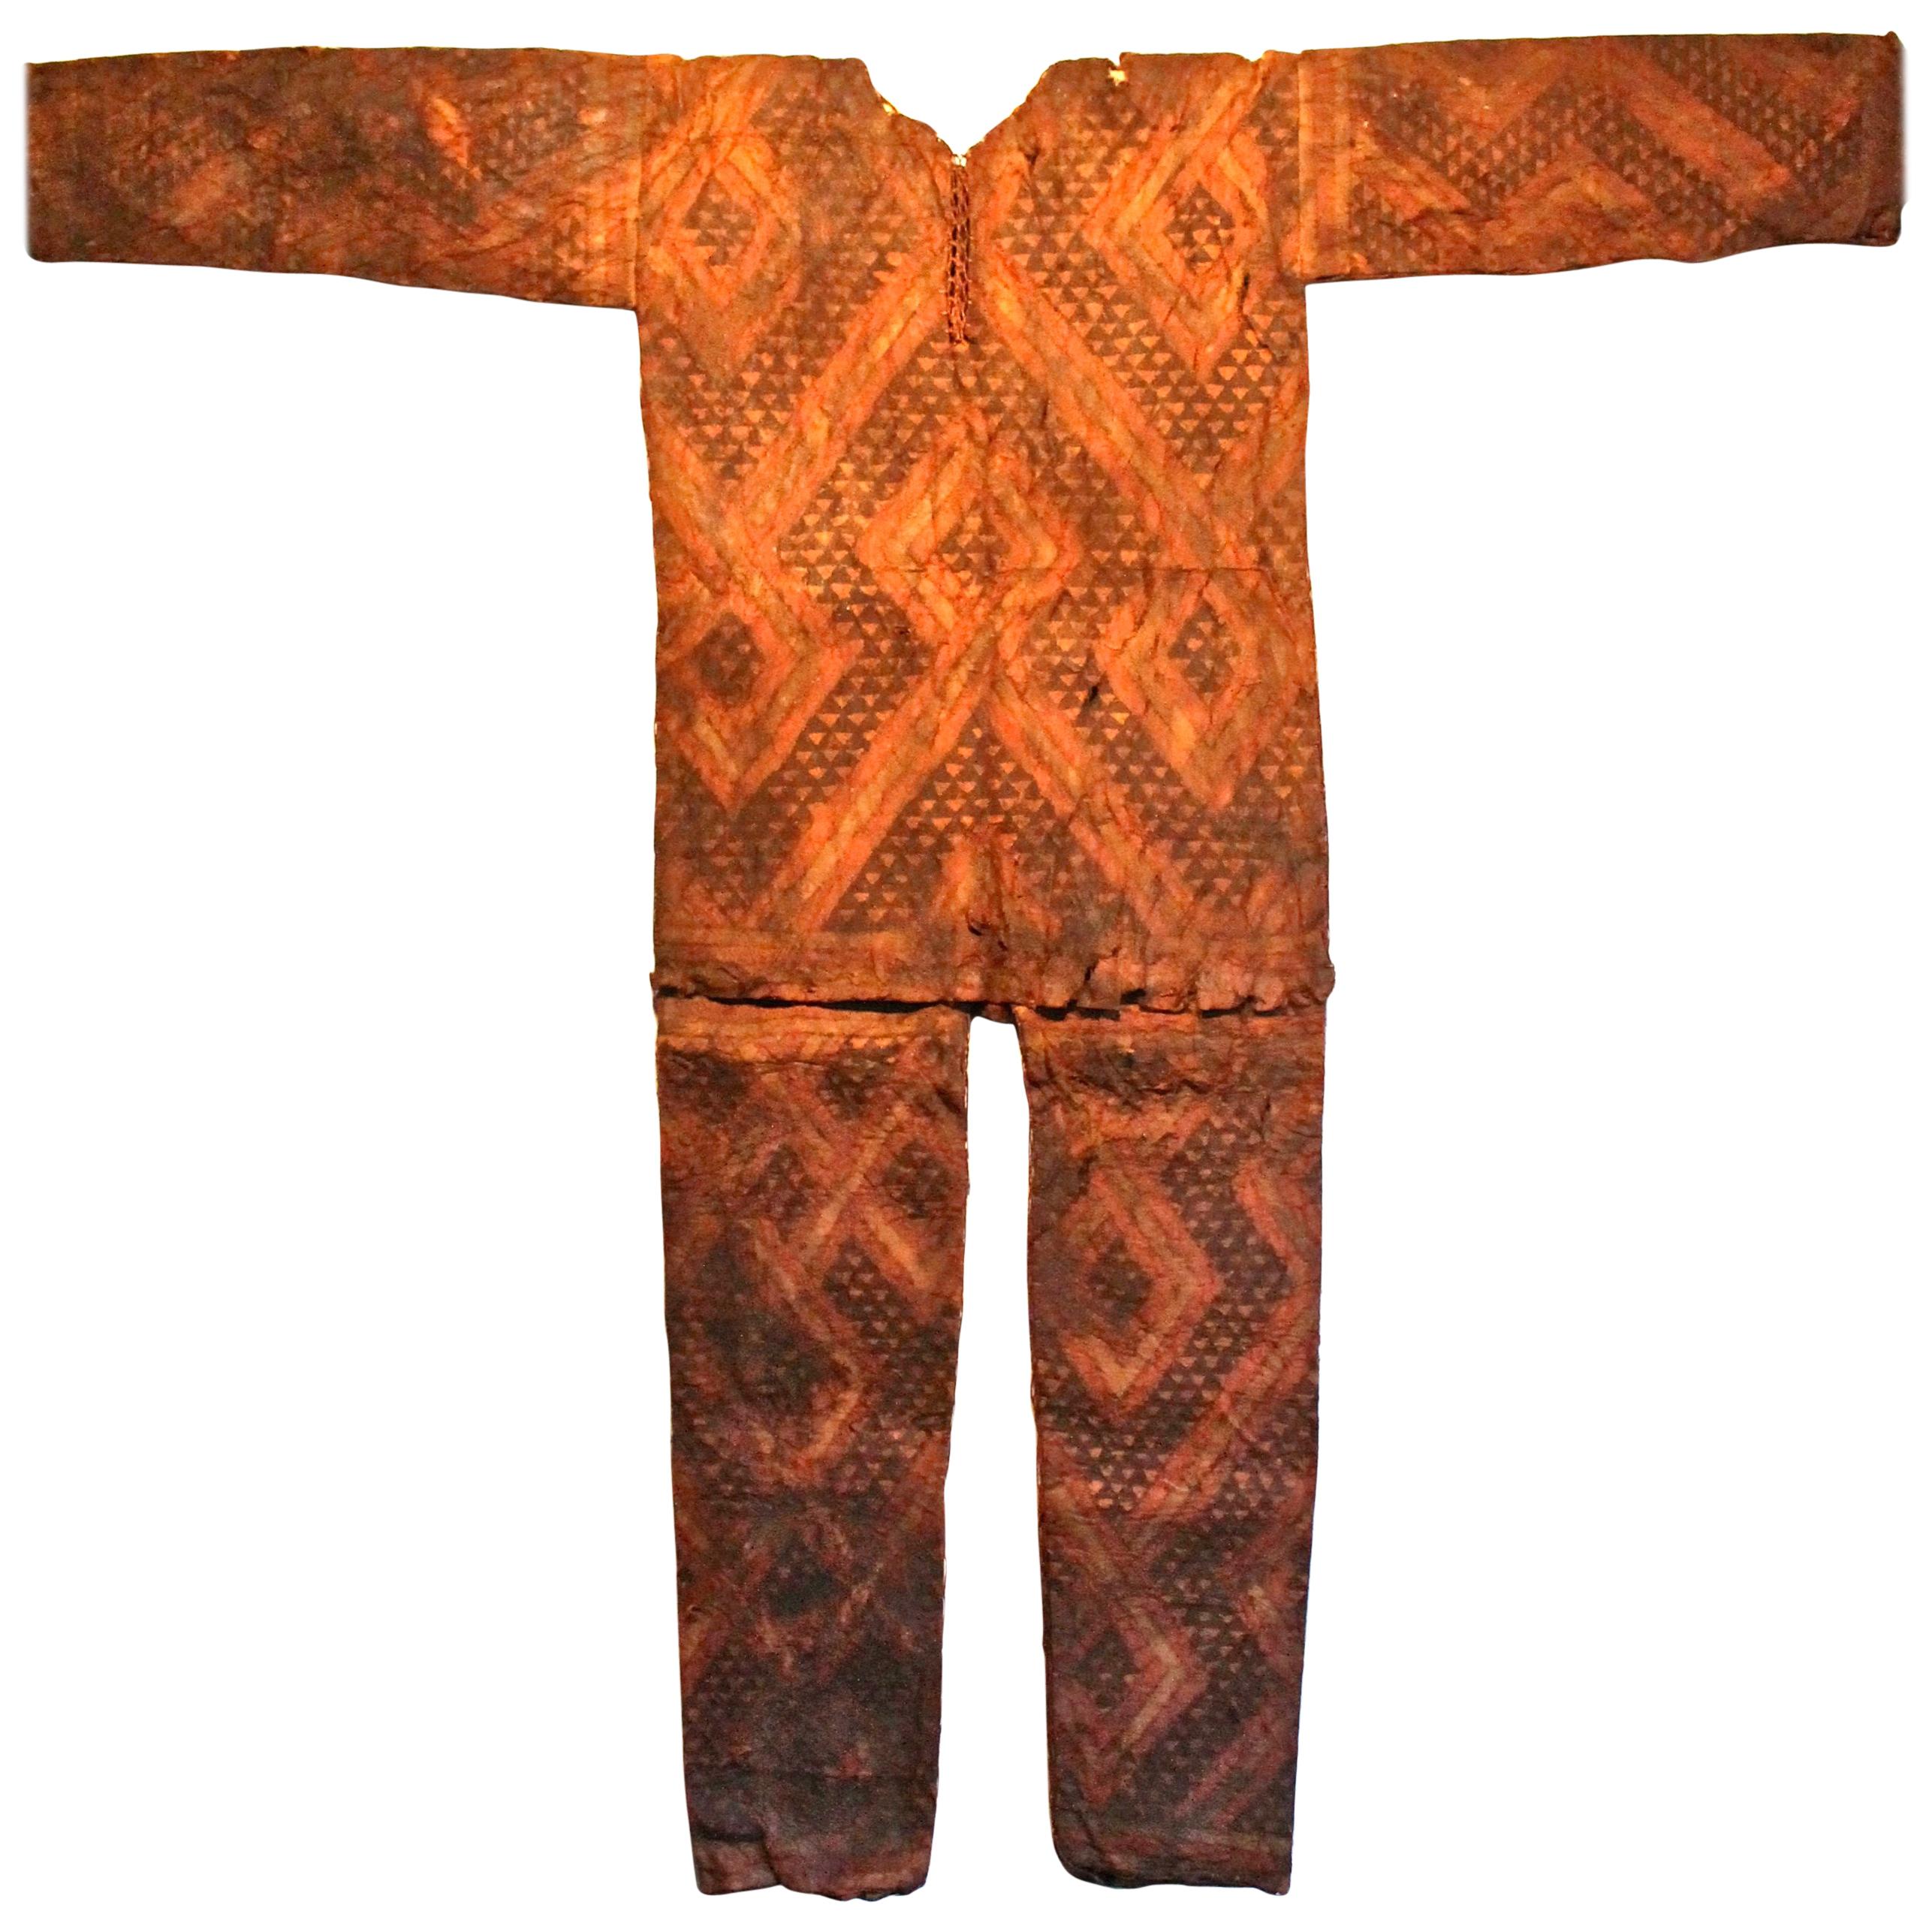 Kuba Ceremonial Dance Outfit For Sale